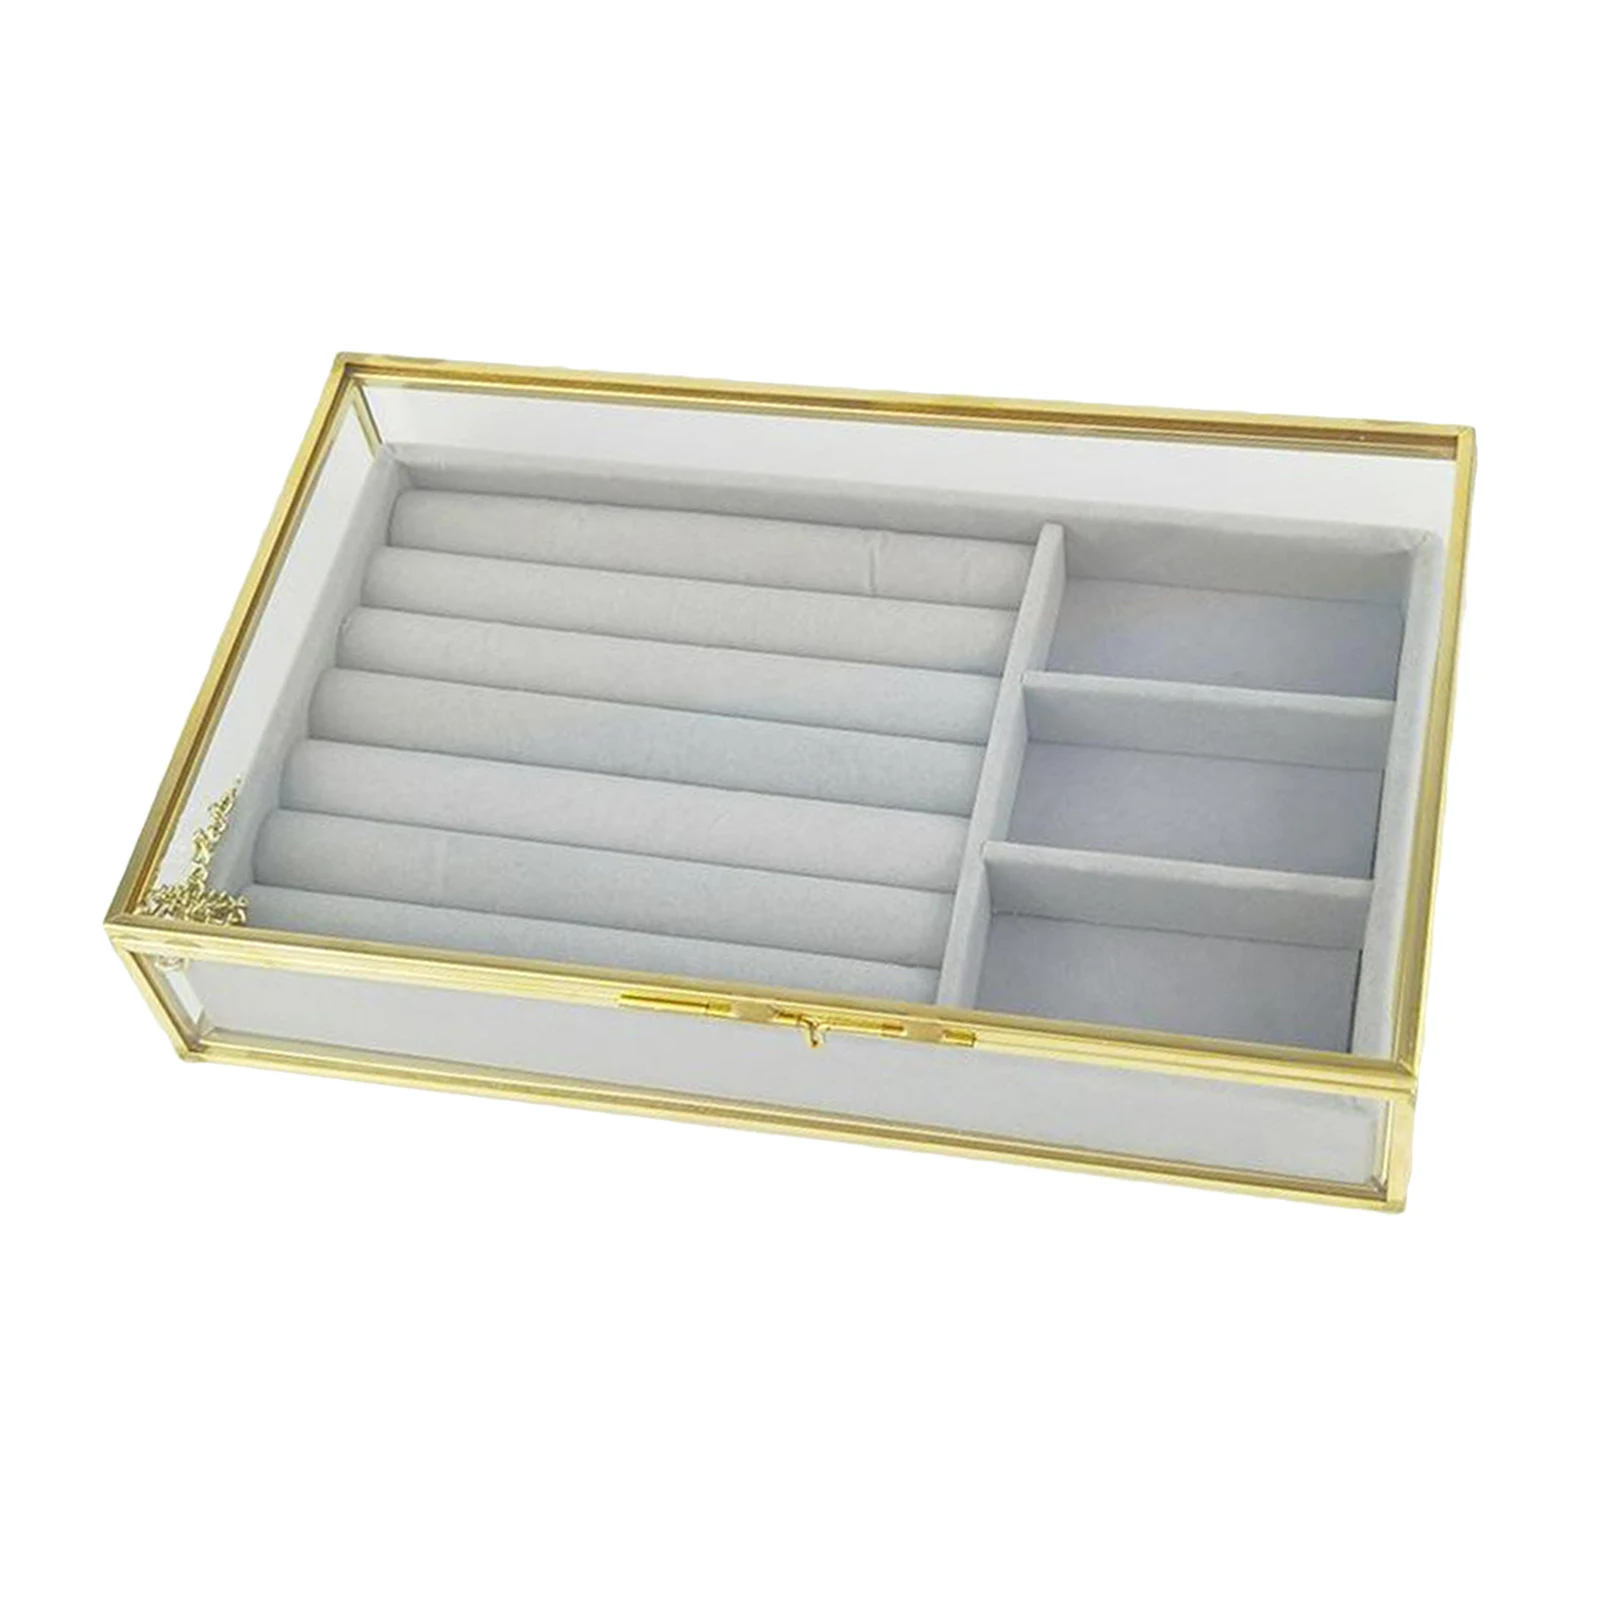 Stackable Jewelry Tray with Lid Velvet Earring Drawer Insert Display Show Case, Dresser Organizer for Ring Stud, Necklace Holder 12 pcs paper silver drawer gift box jewelry packaging cardboard ring necklace bracelet earring display boxes with sponge